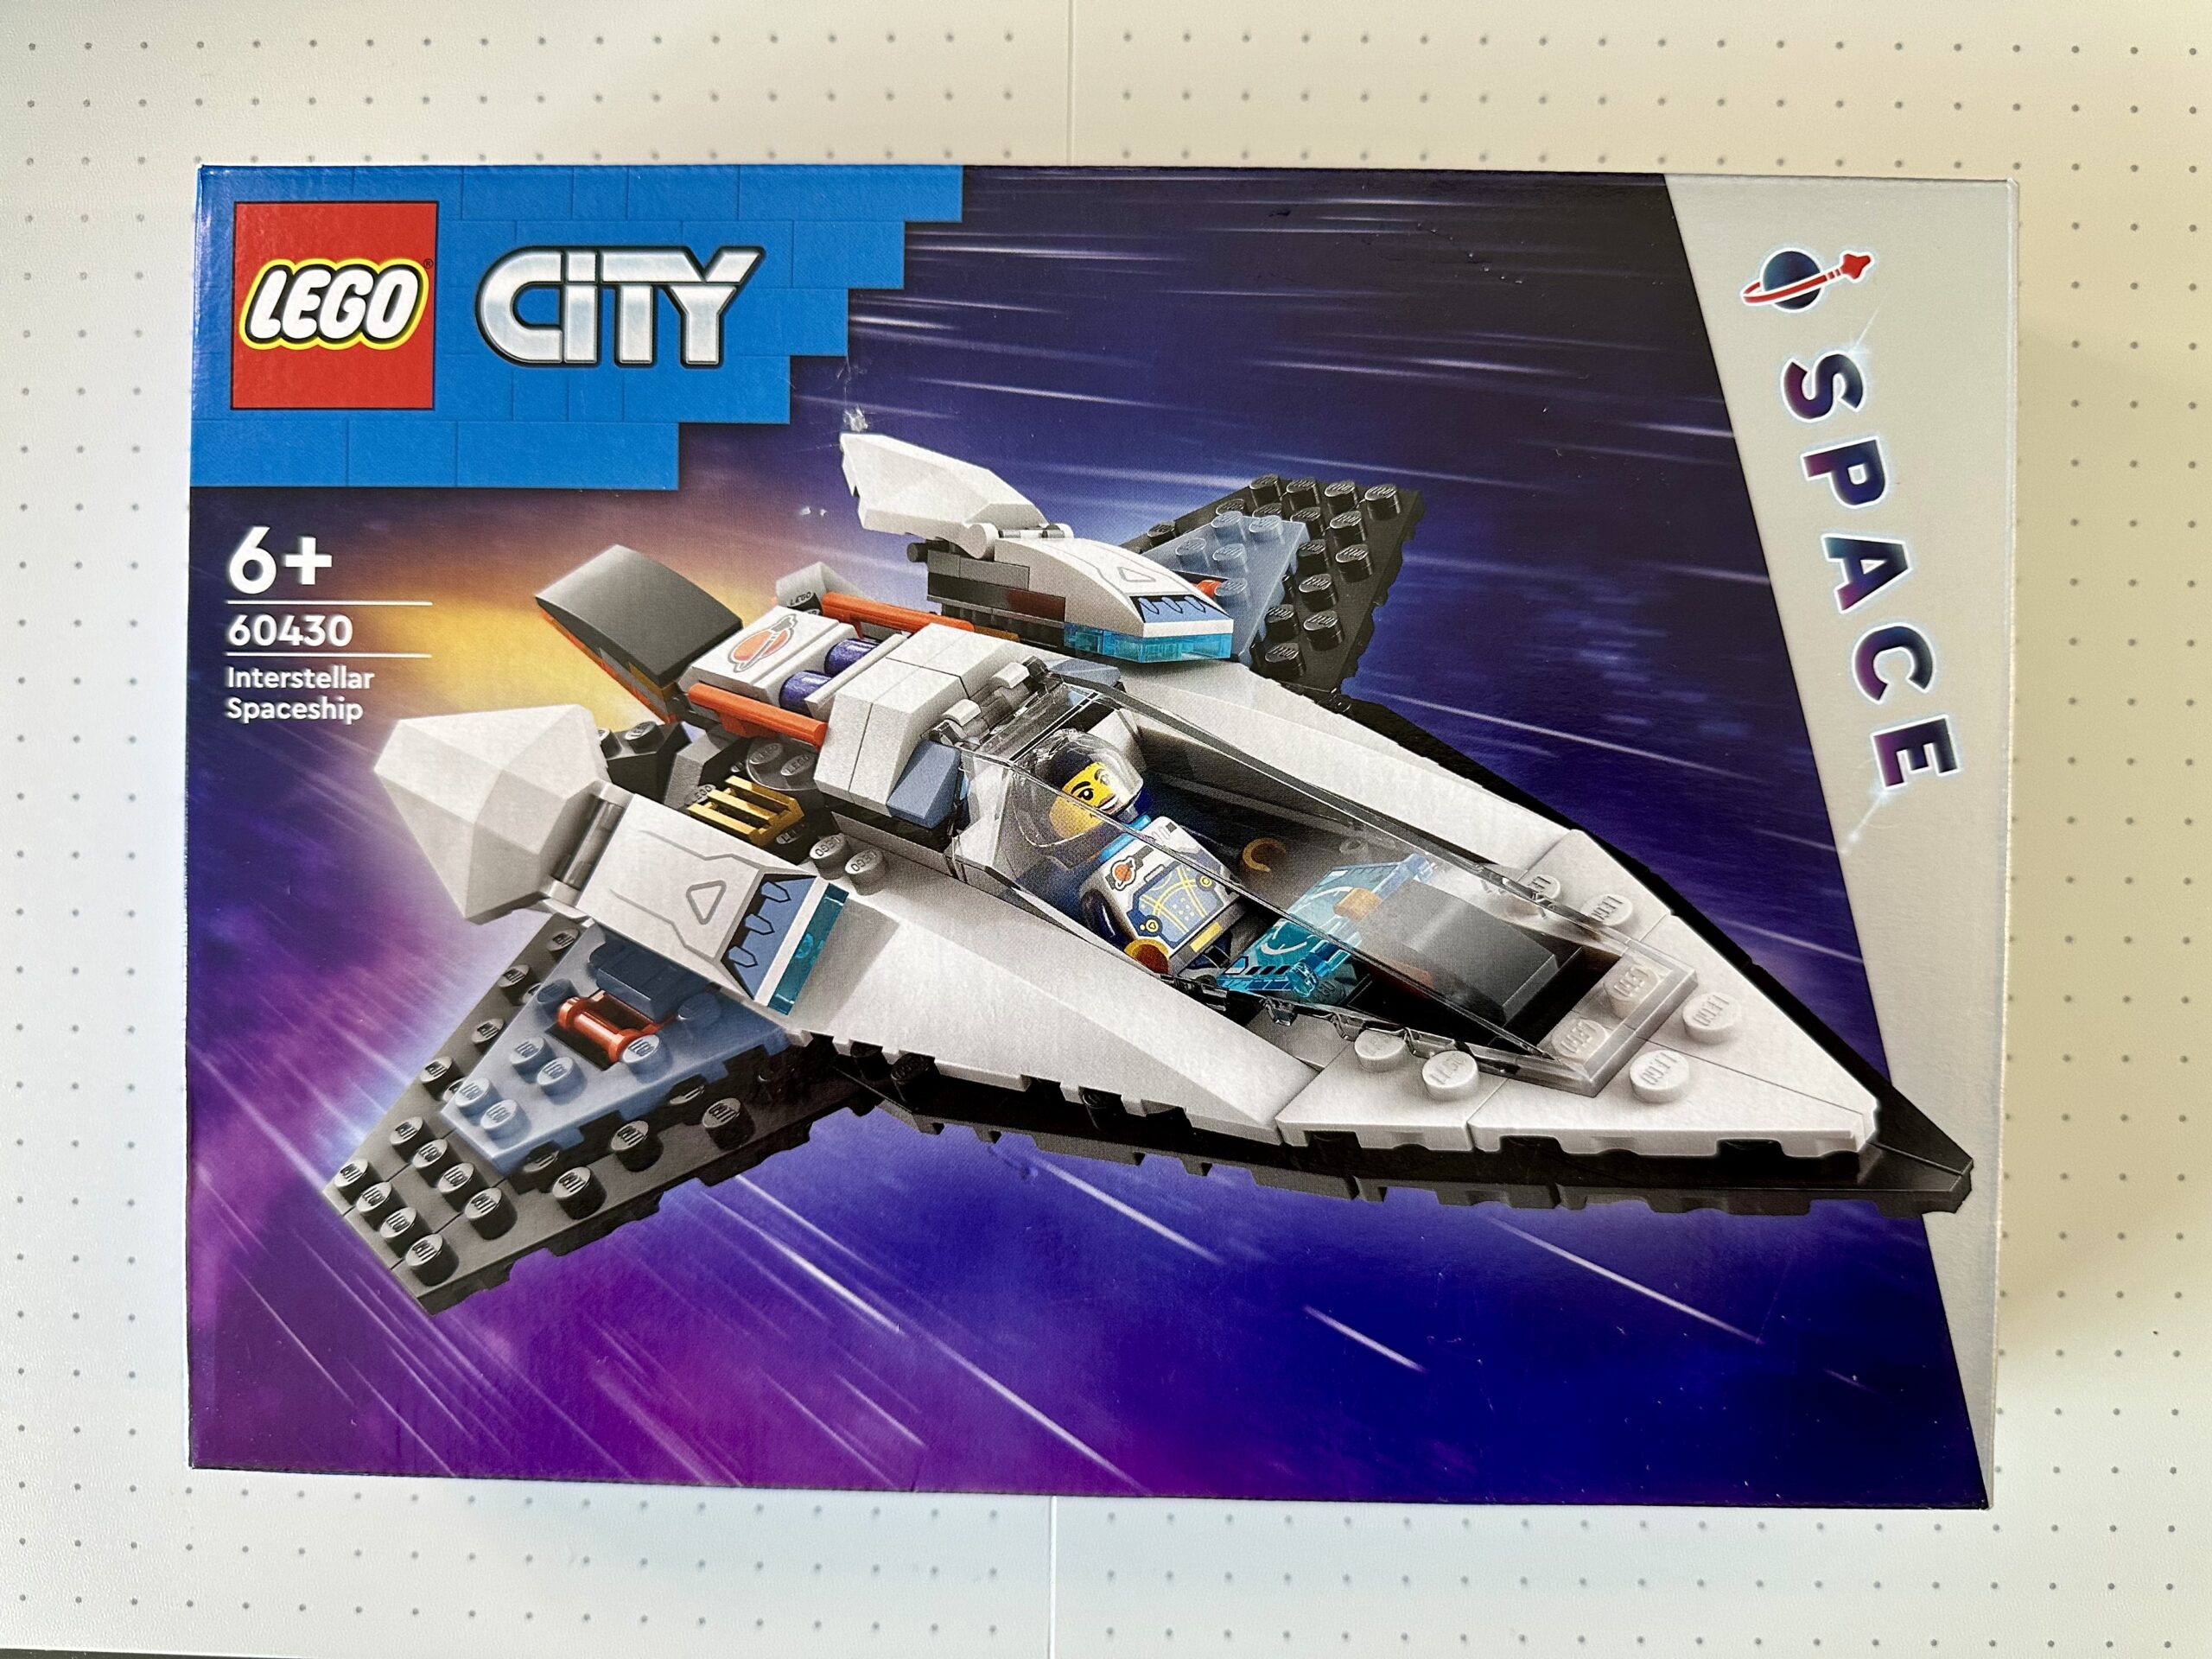 Box for LEGO City Space set 60430 Interstellar Spaceship. Box depicts a sleek white and black spaceship piloted by an astronaut.